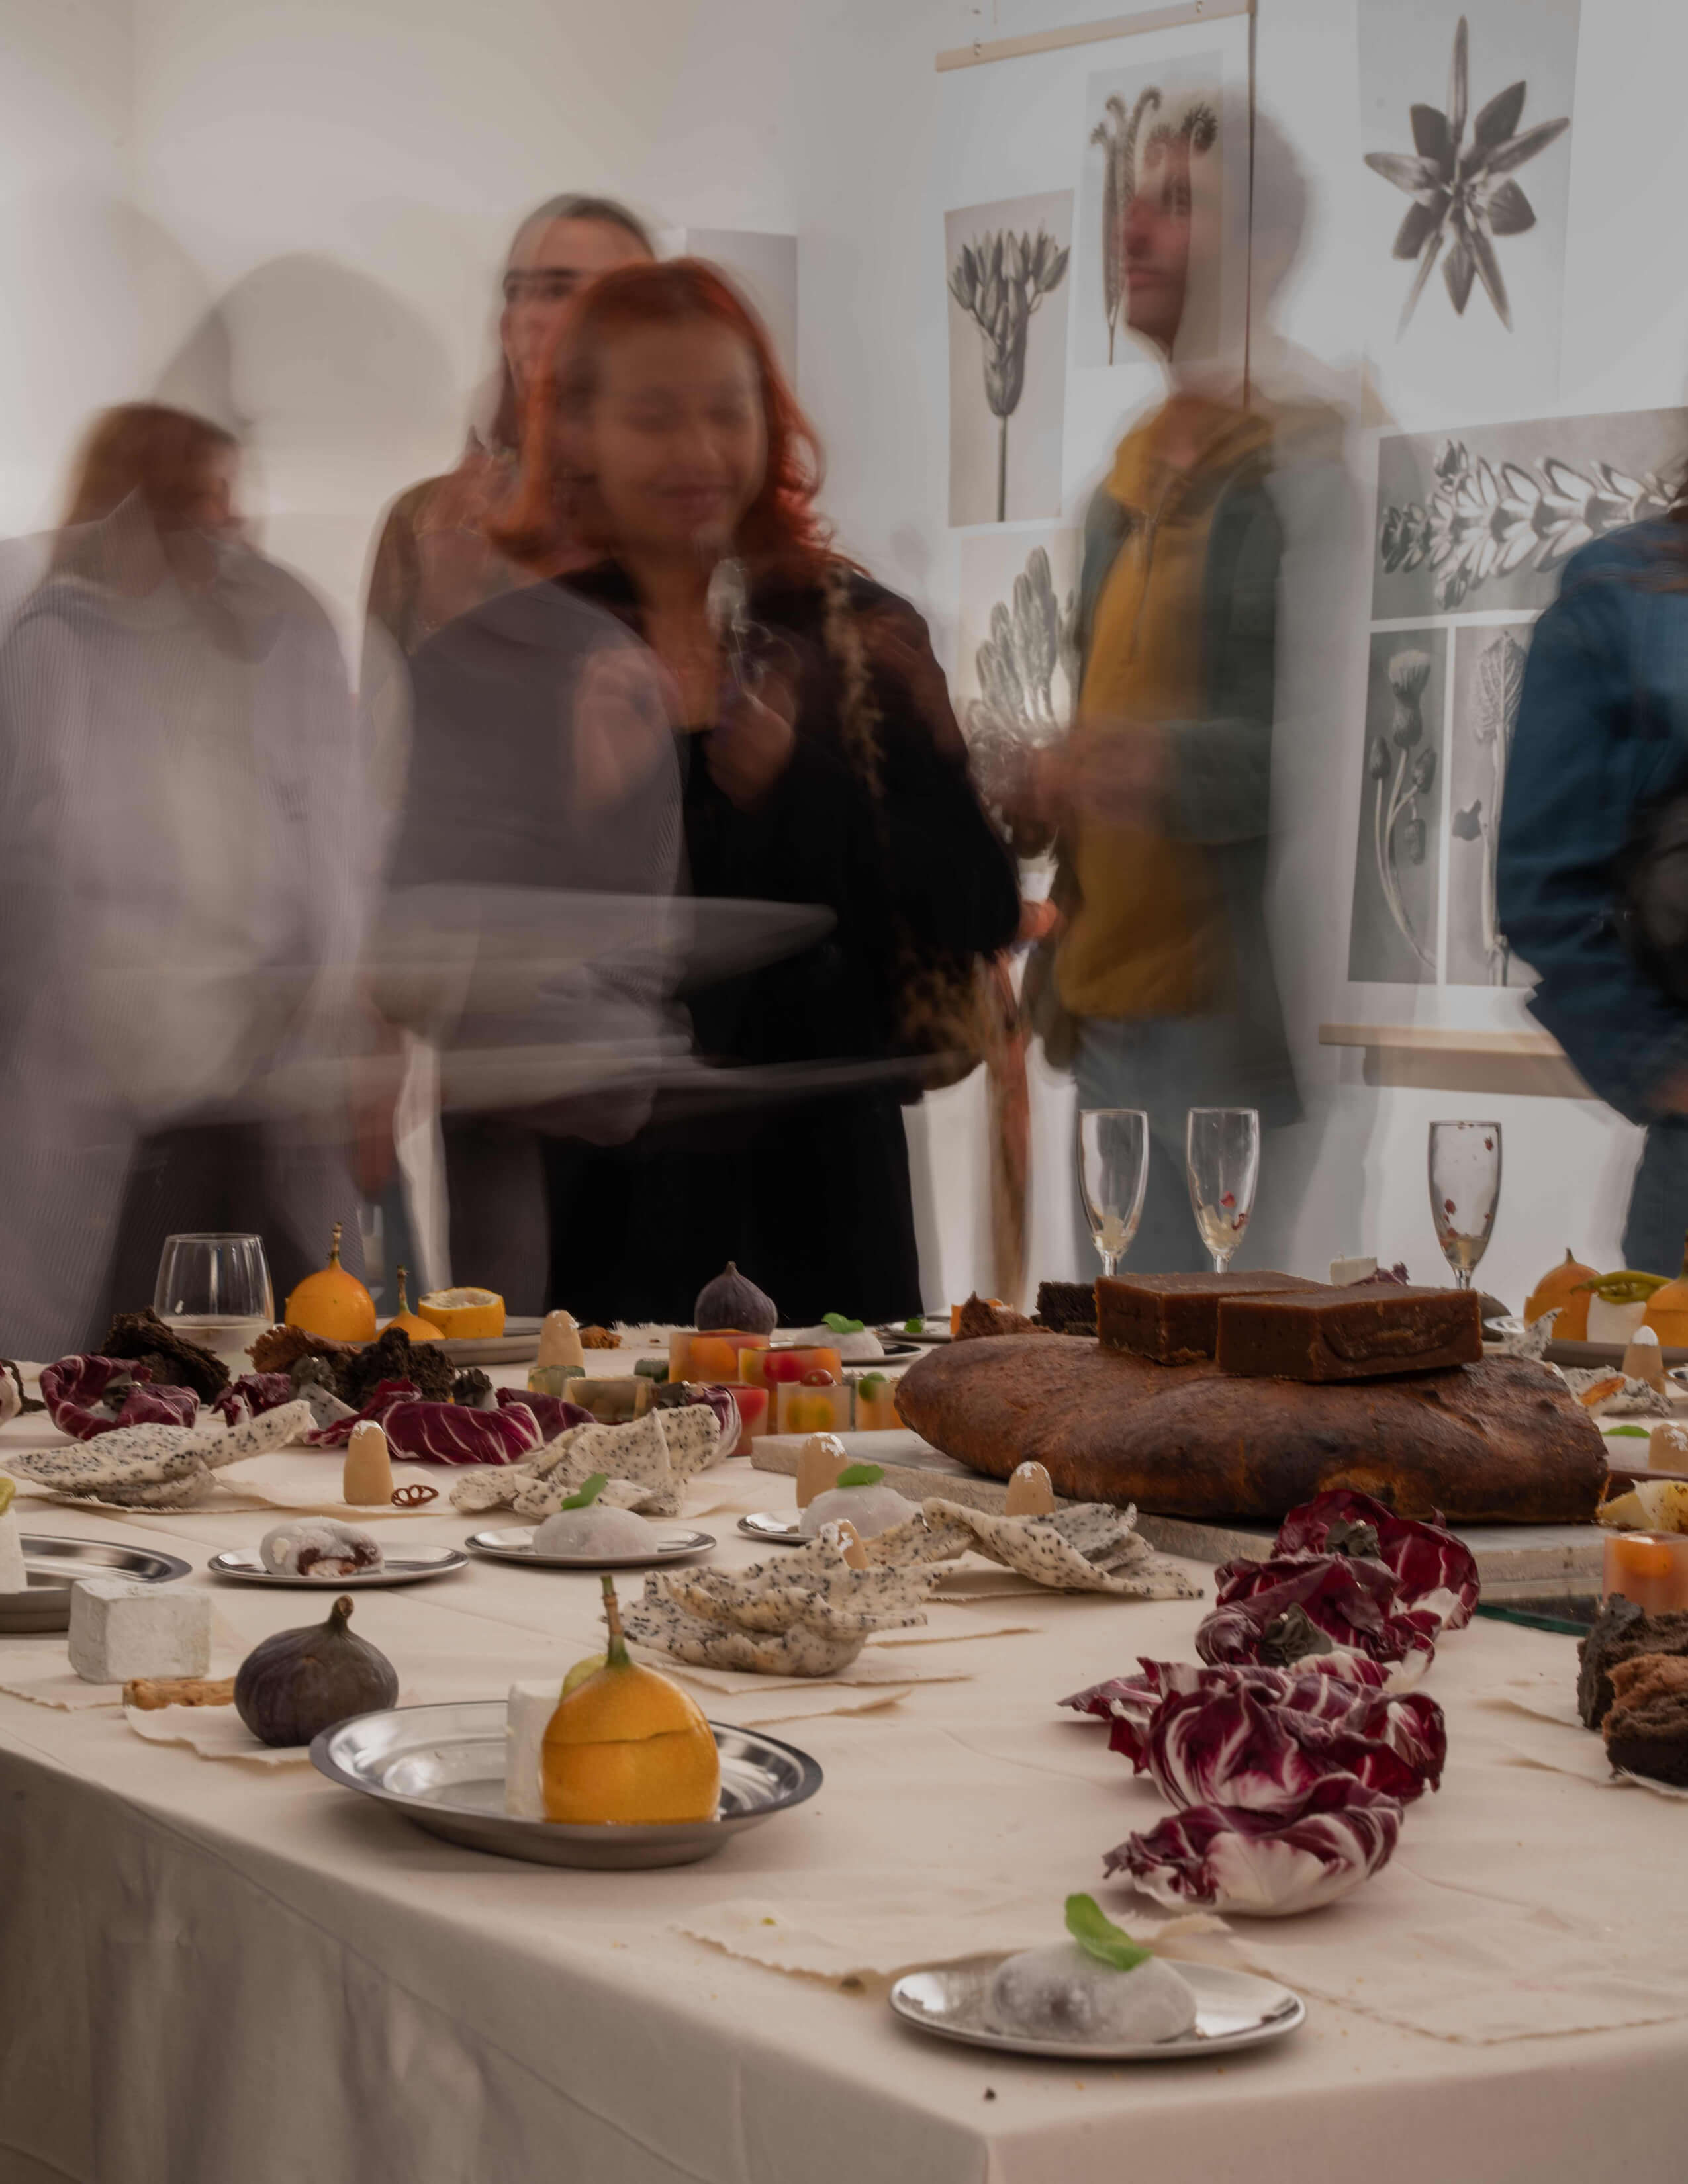 A photograph capturing people’s movement with a table of nicely presented food.